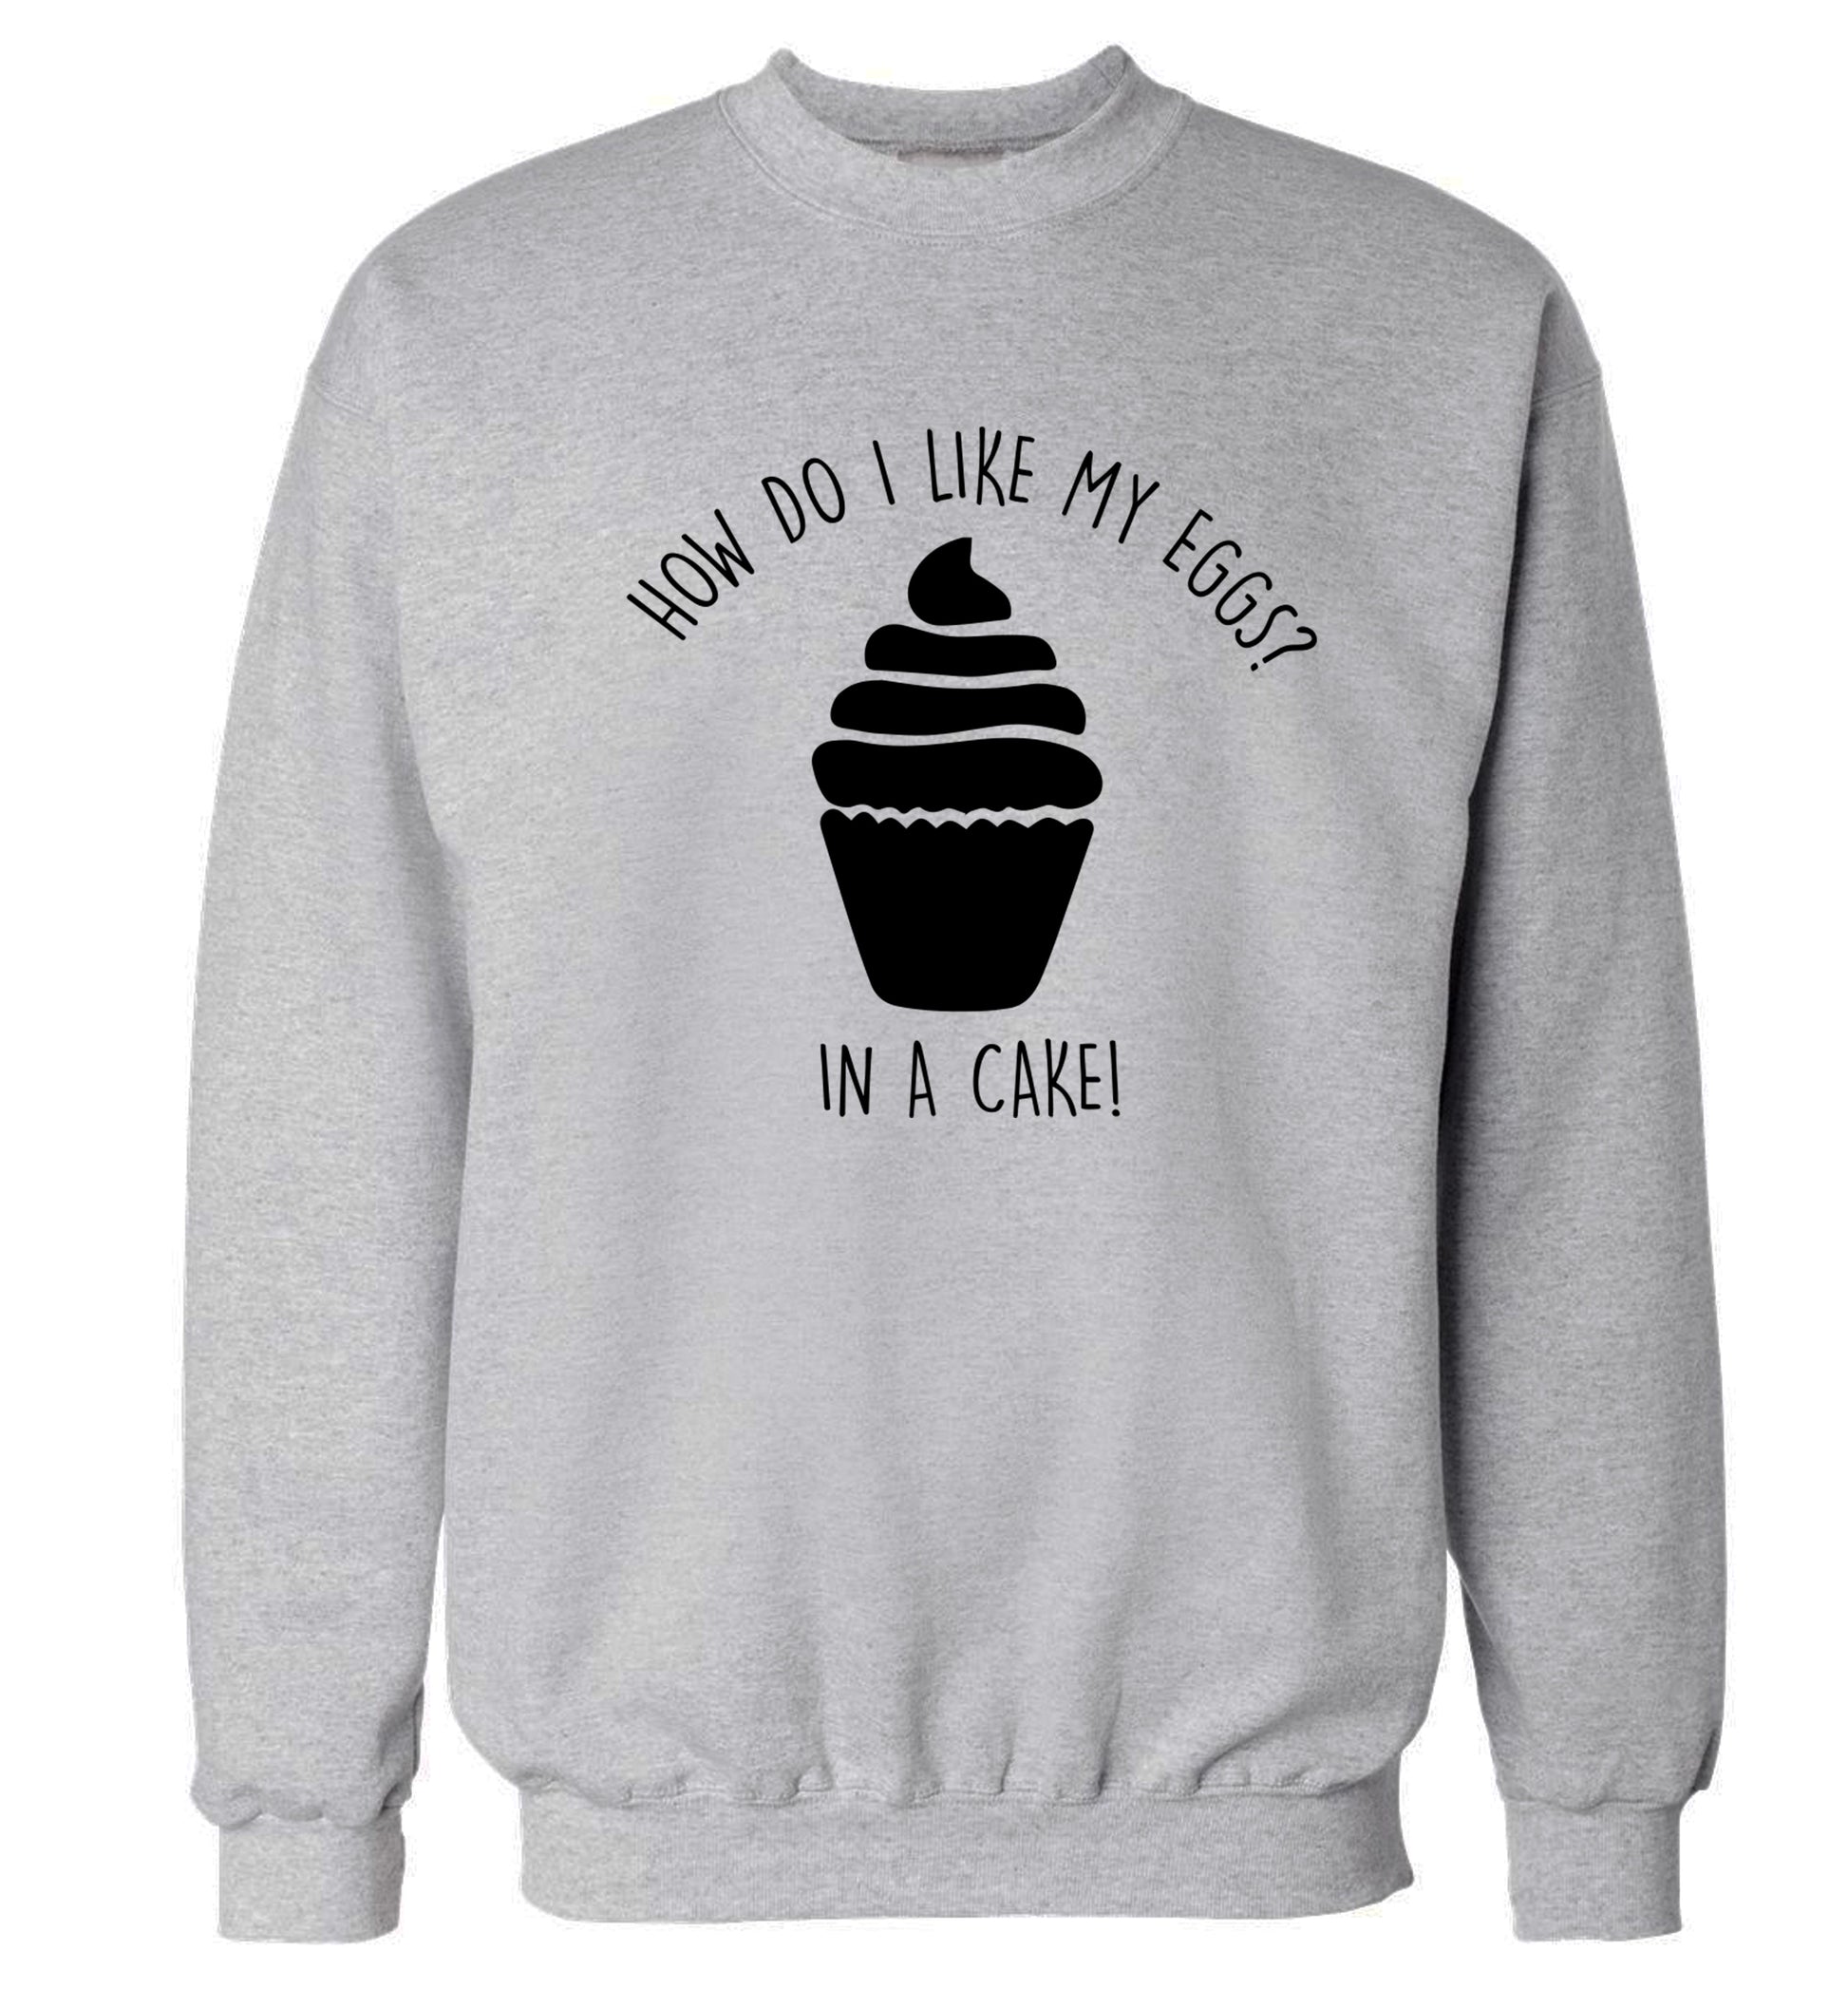 How do I like my eggs? In a cake! Adult's unisex grey Sweater 2XL